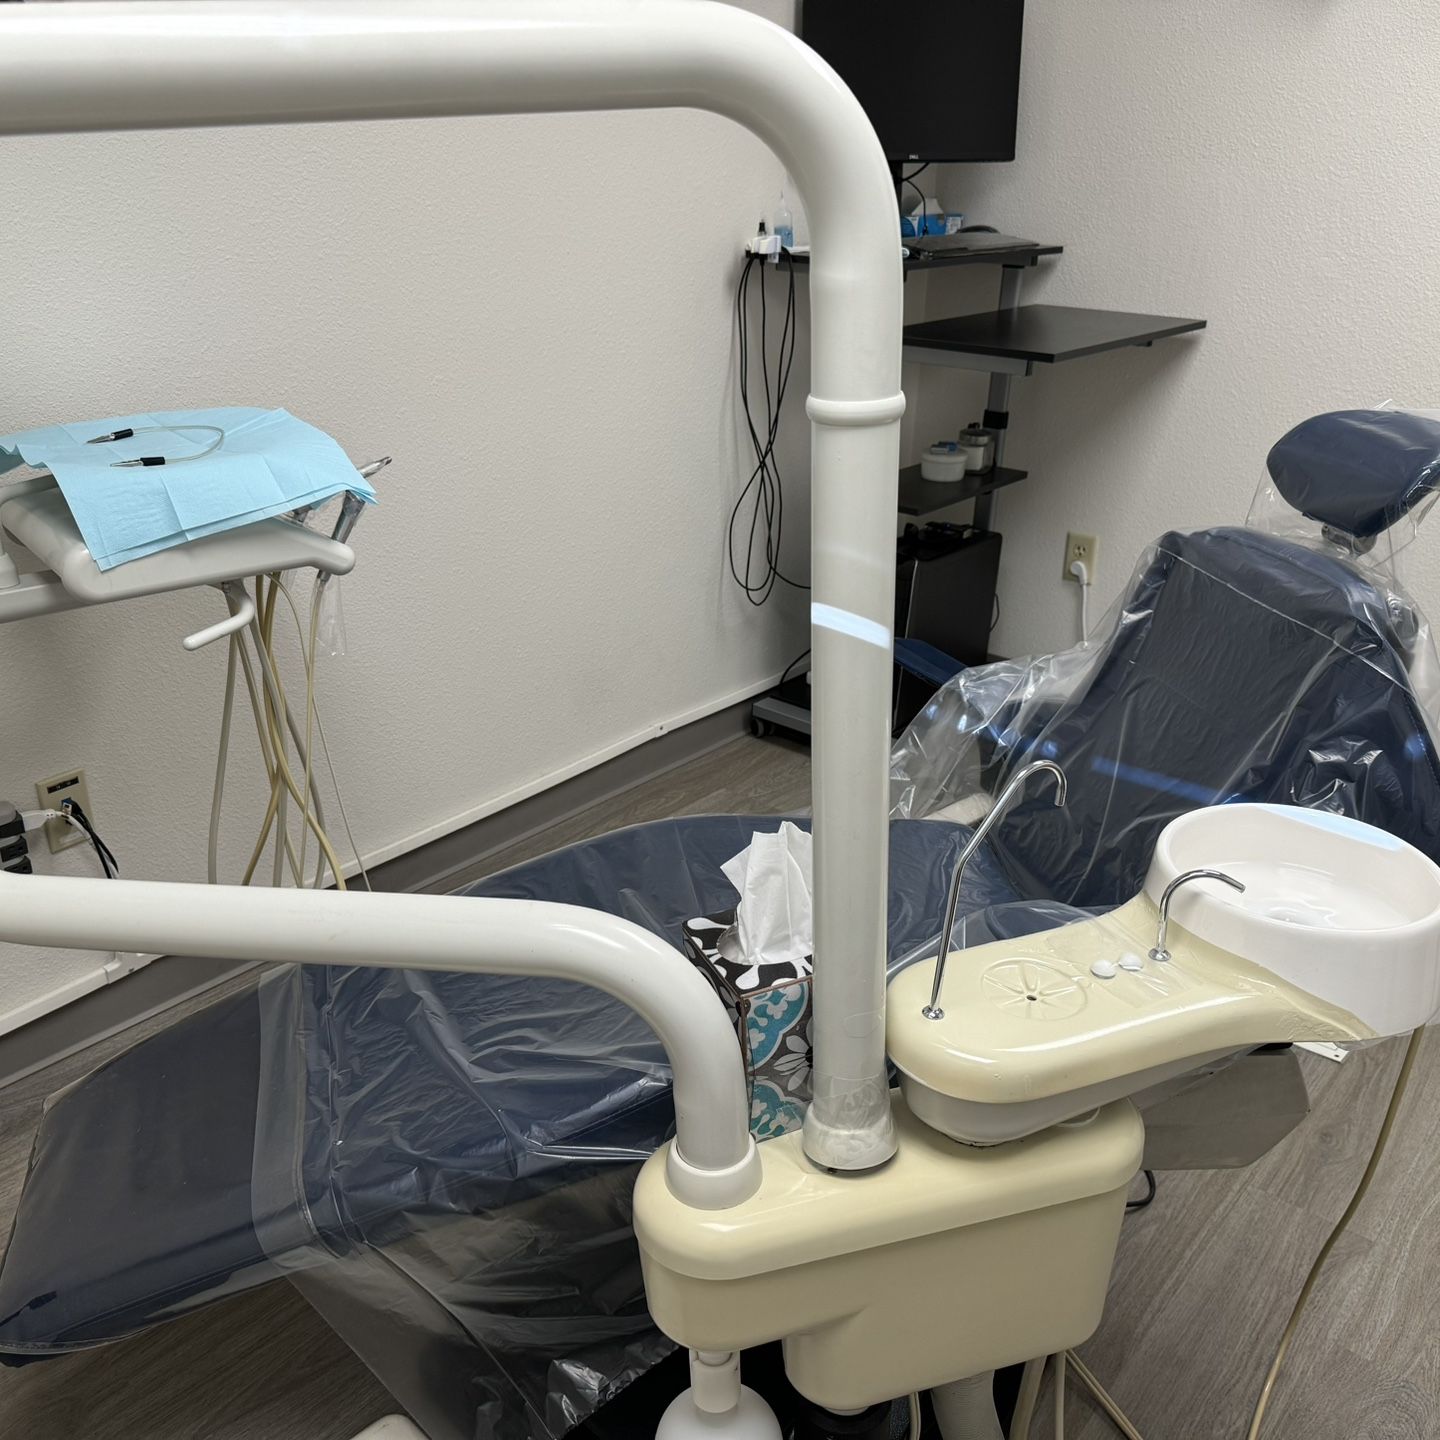 2 Healthco Dental Chairs For Sale